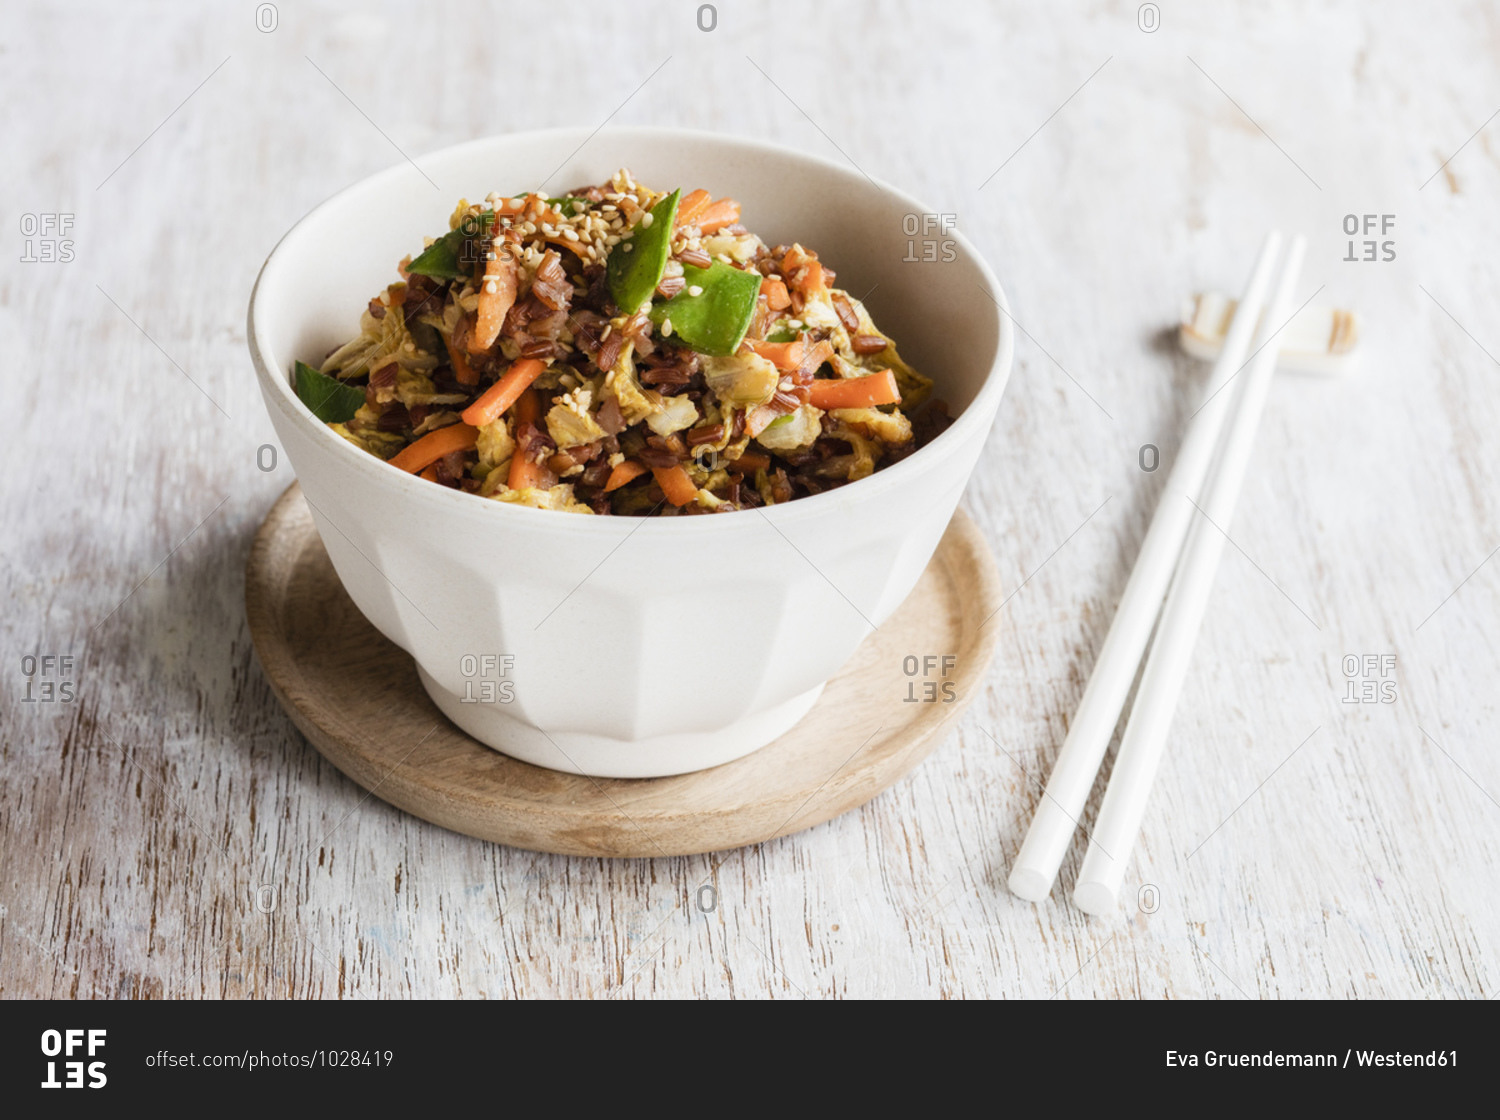 Chopsticks and bowl of fried red rice with vegetables